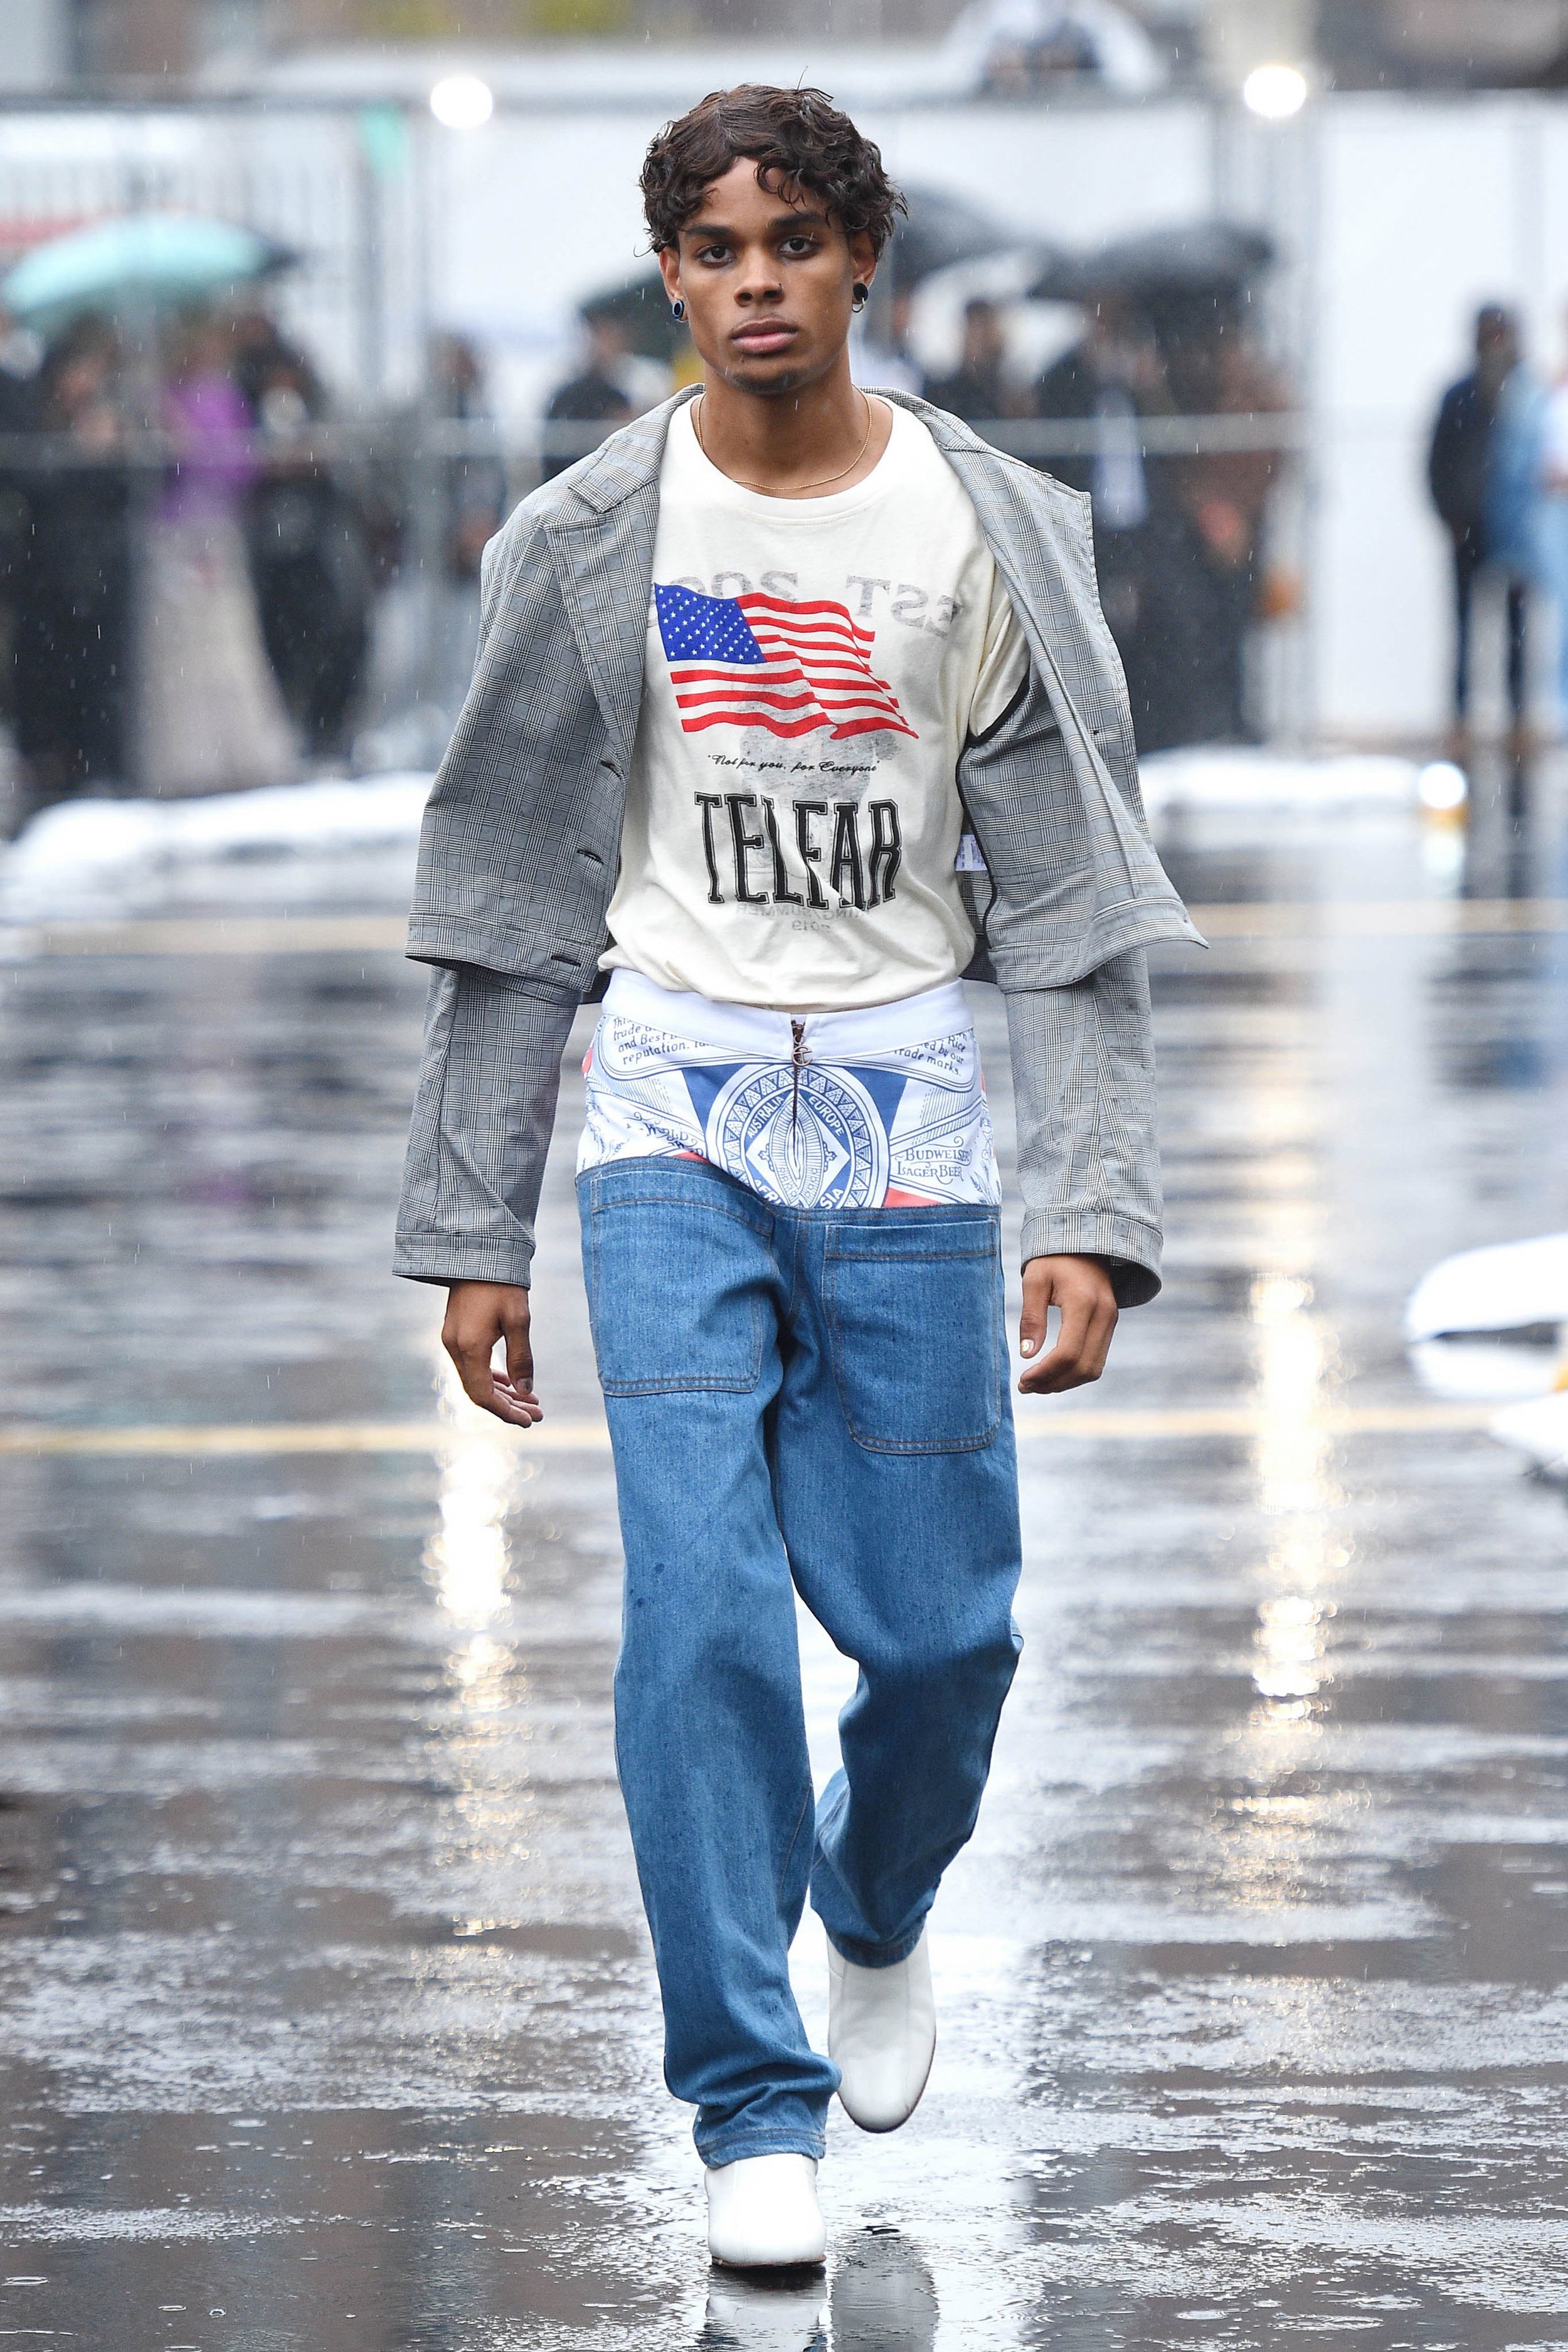 Photos that capture the cult of Telfar stans at New York Fashion